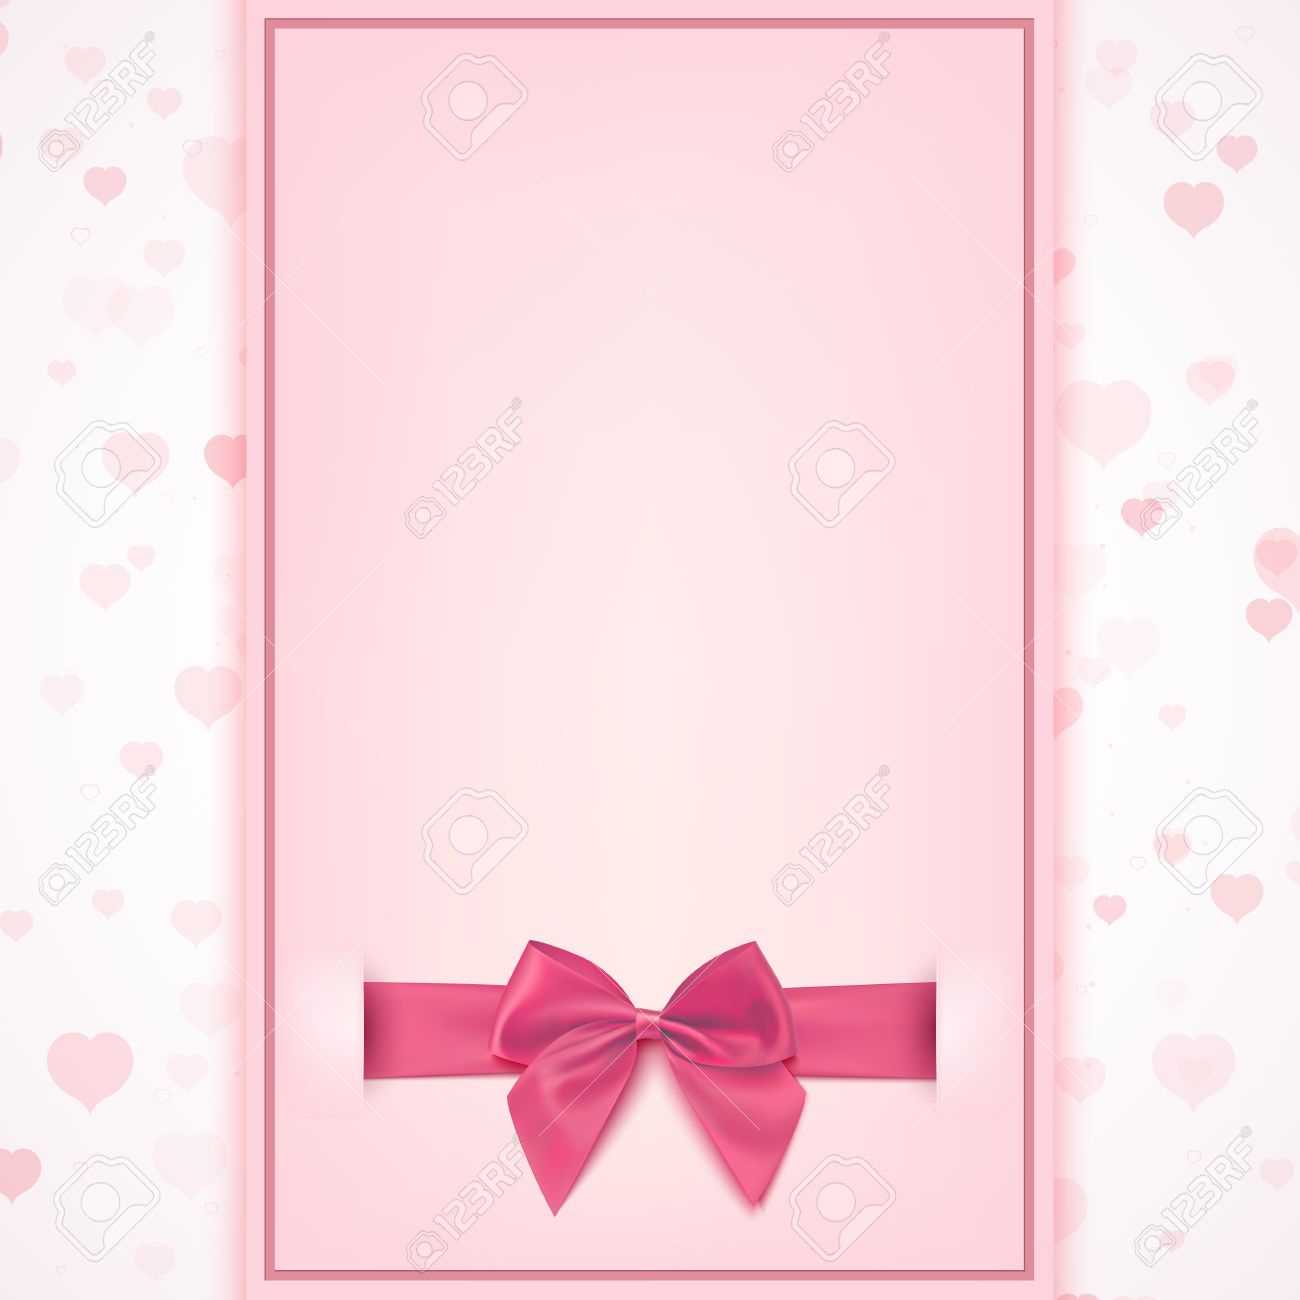 Blank Greeting Card Template For Baby Girl Shower Celebration,.. For Free Printable Blank Greeting Card Templates